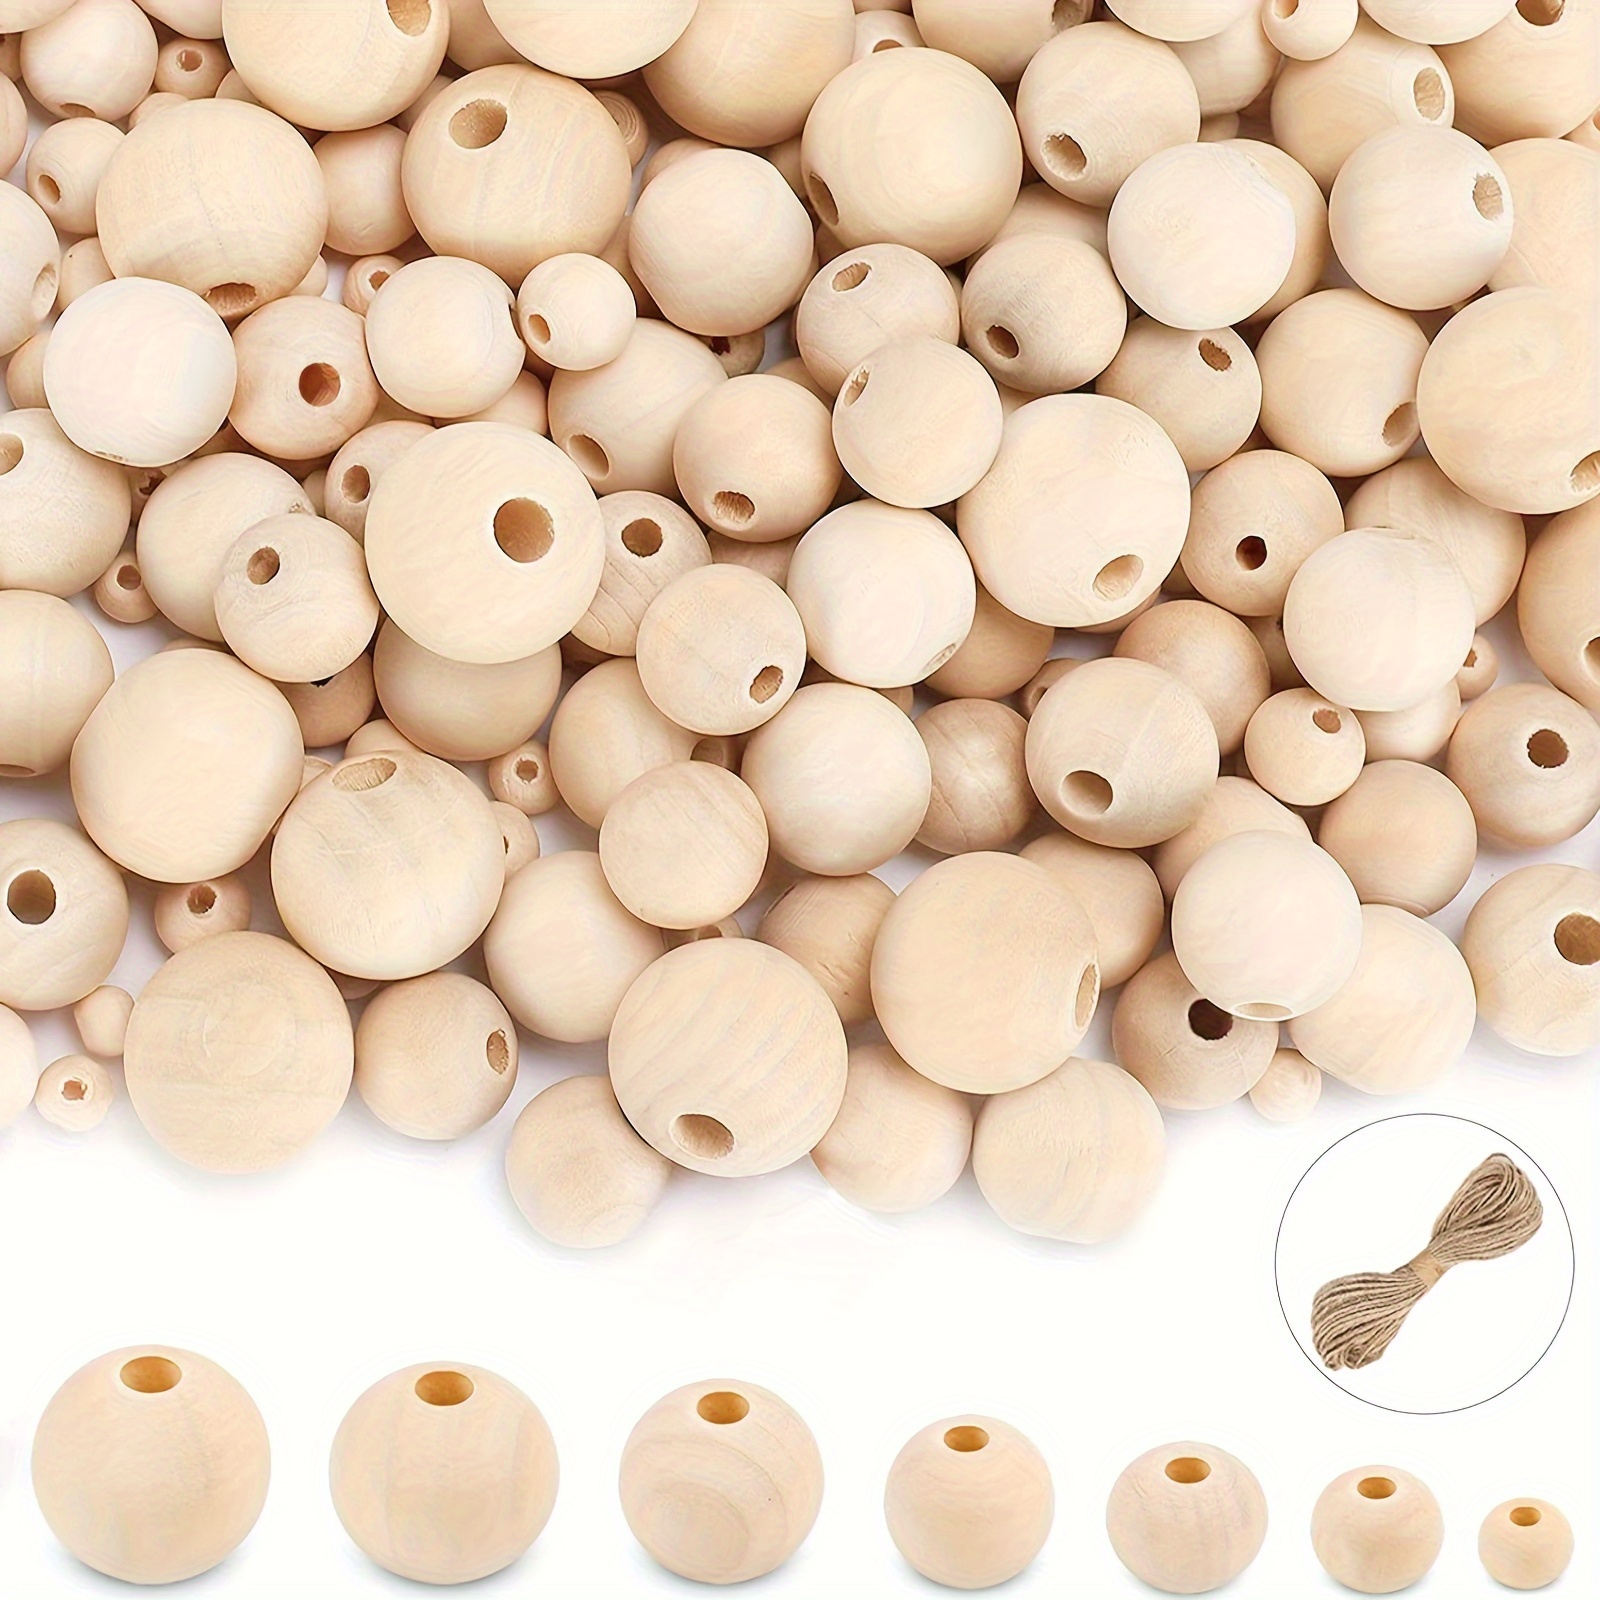 

800pcs Wooden Beads For Crafts 7 Sizes Unfinished, Wood Beads Wooden Beads Bulk 6mm, 8mm, 10mm, 12mm, 14mm, 16mm, 20mm Beads For Garland Macrame Jewelry Making Diy Farmhouse Decor